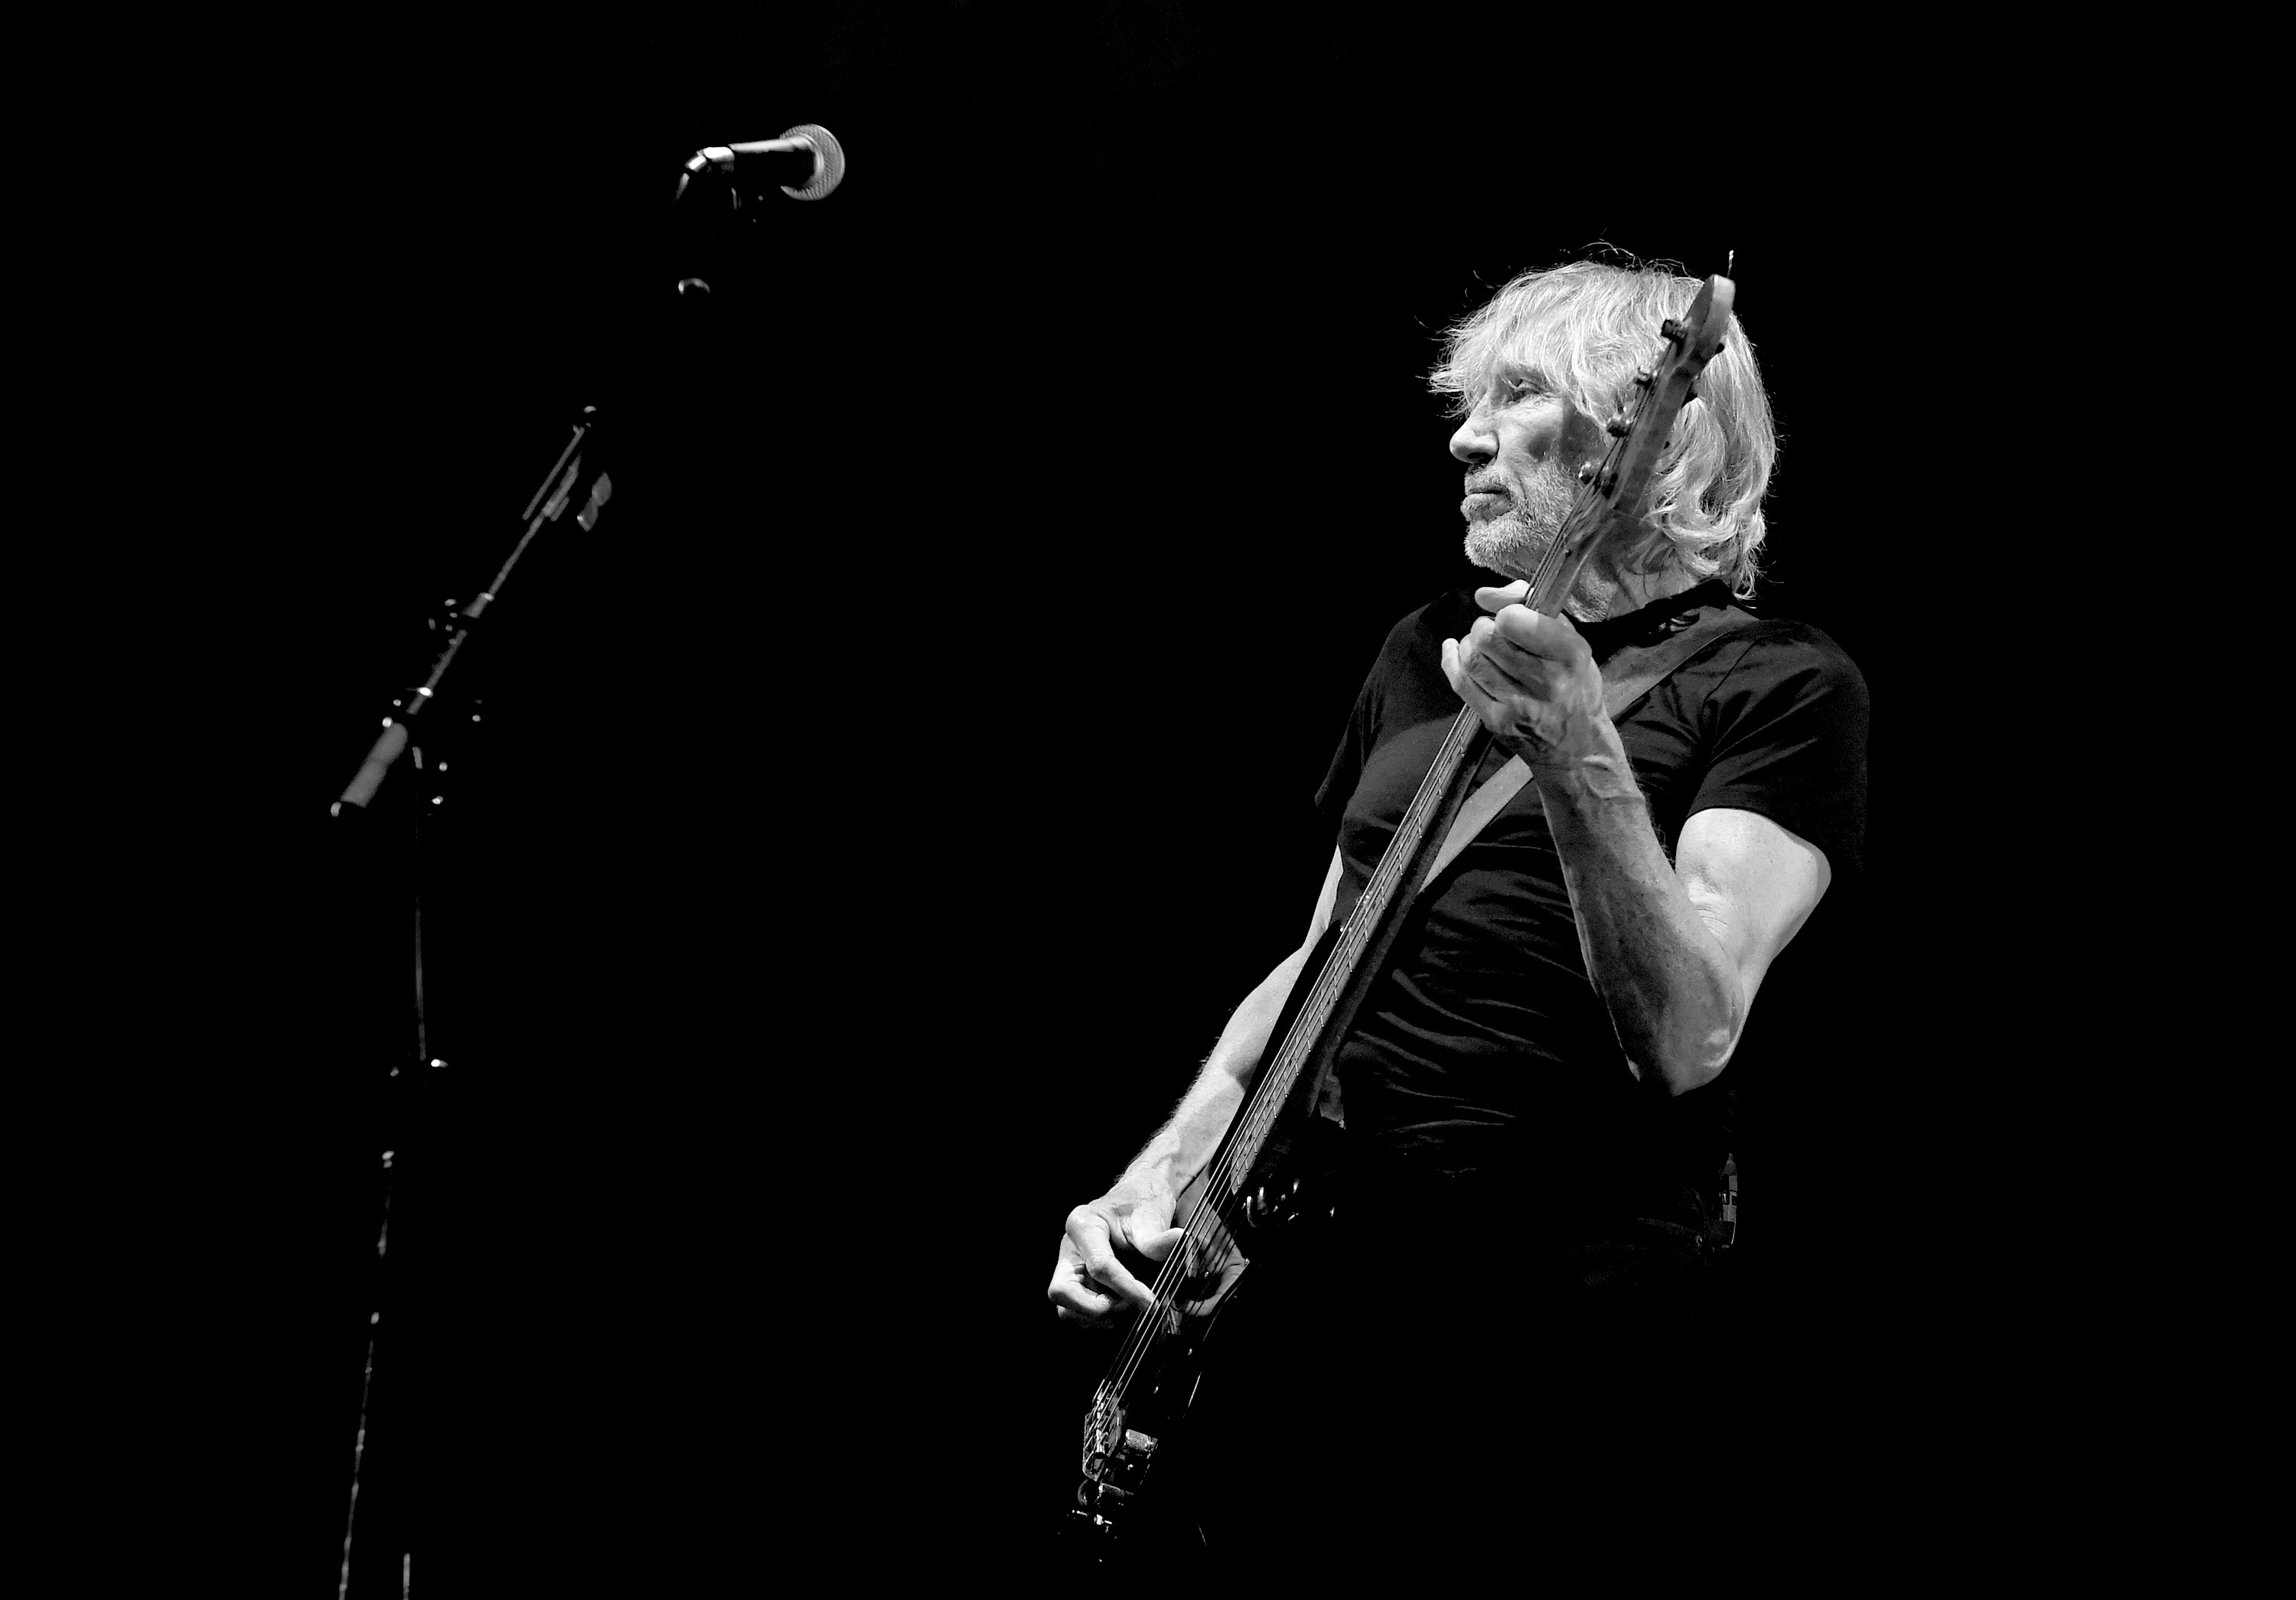 Roger Waters plays remote version of 'Mother' by Pink Floyd - The Arrow 3000x2100